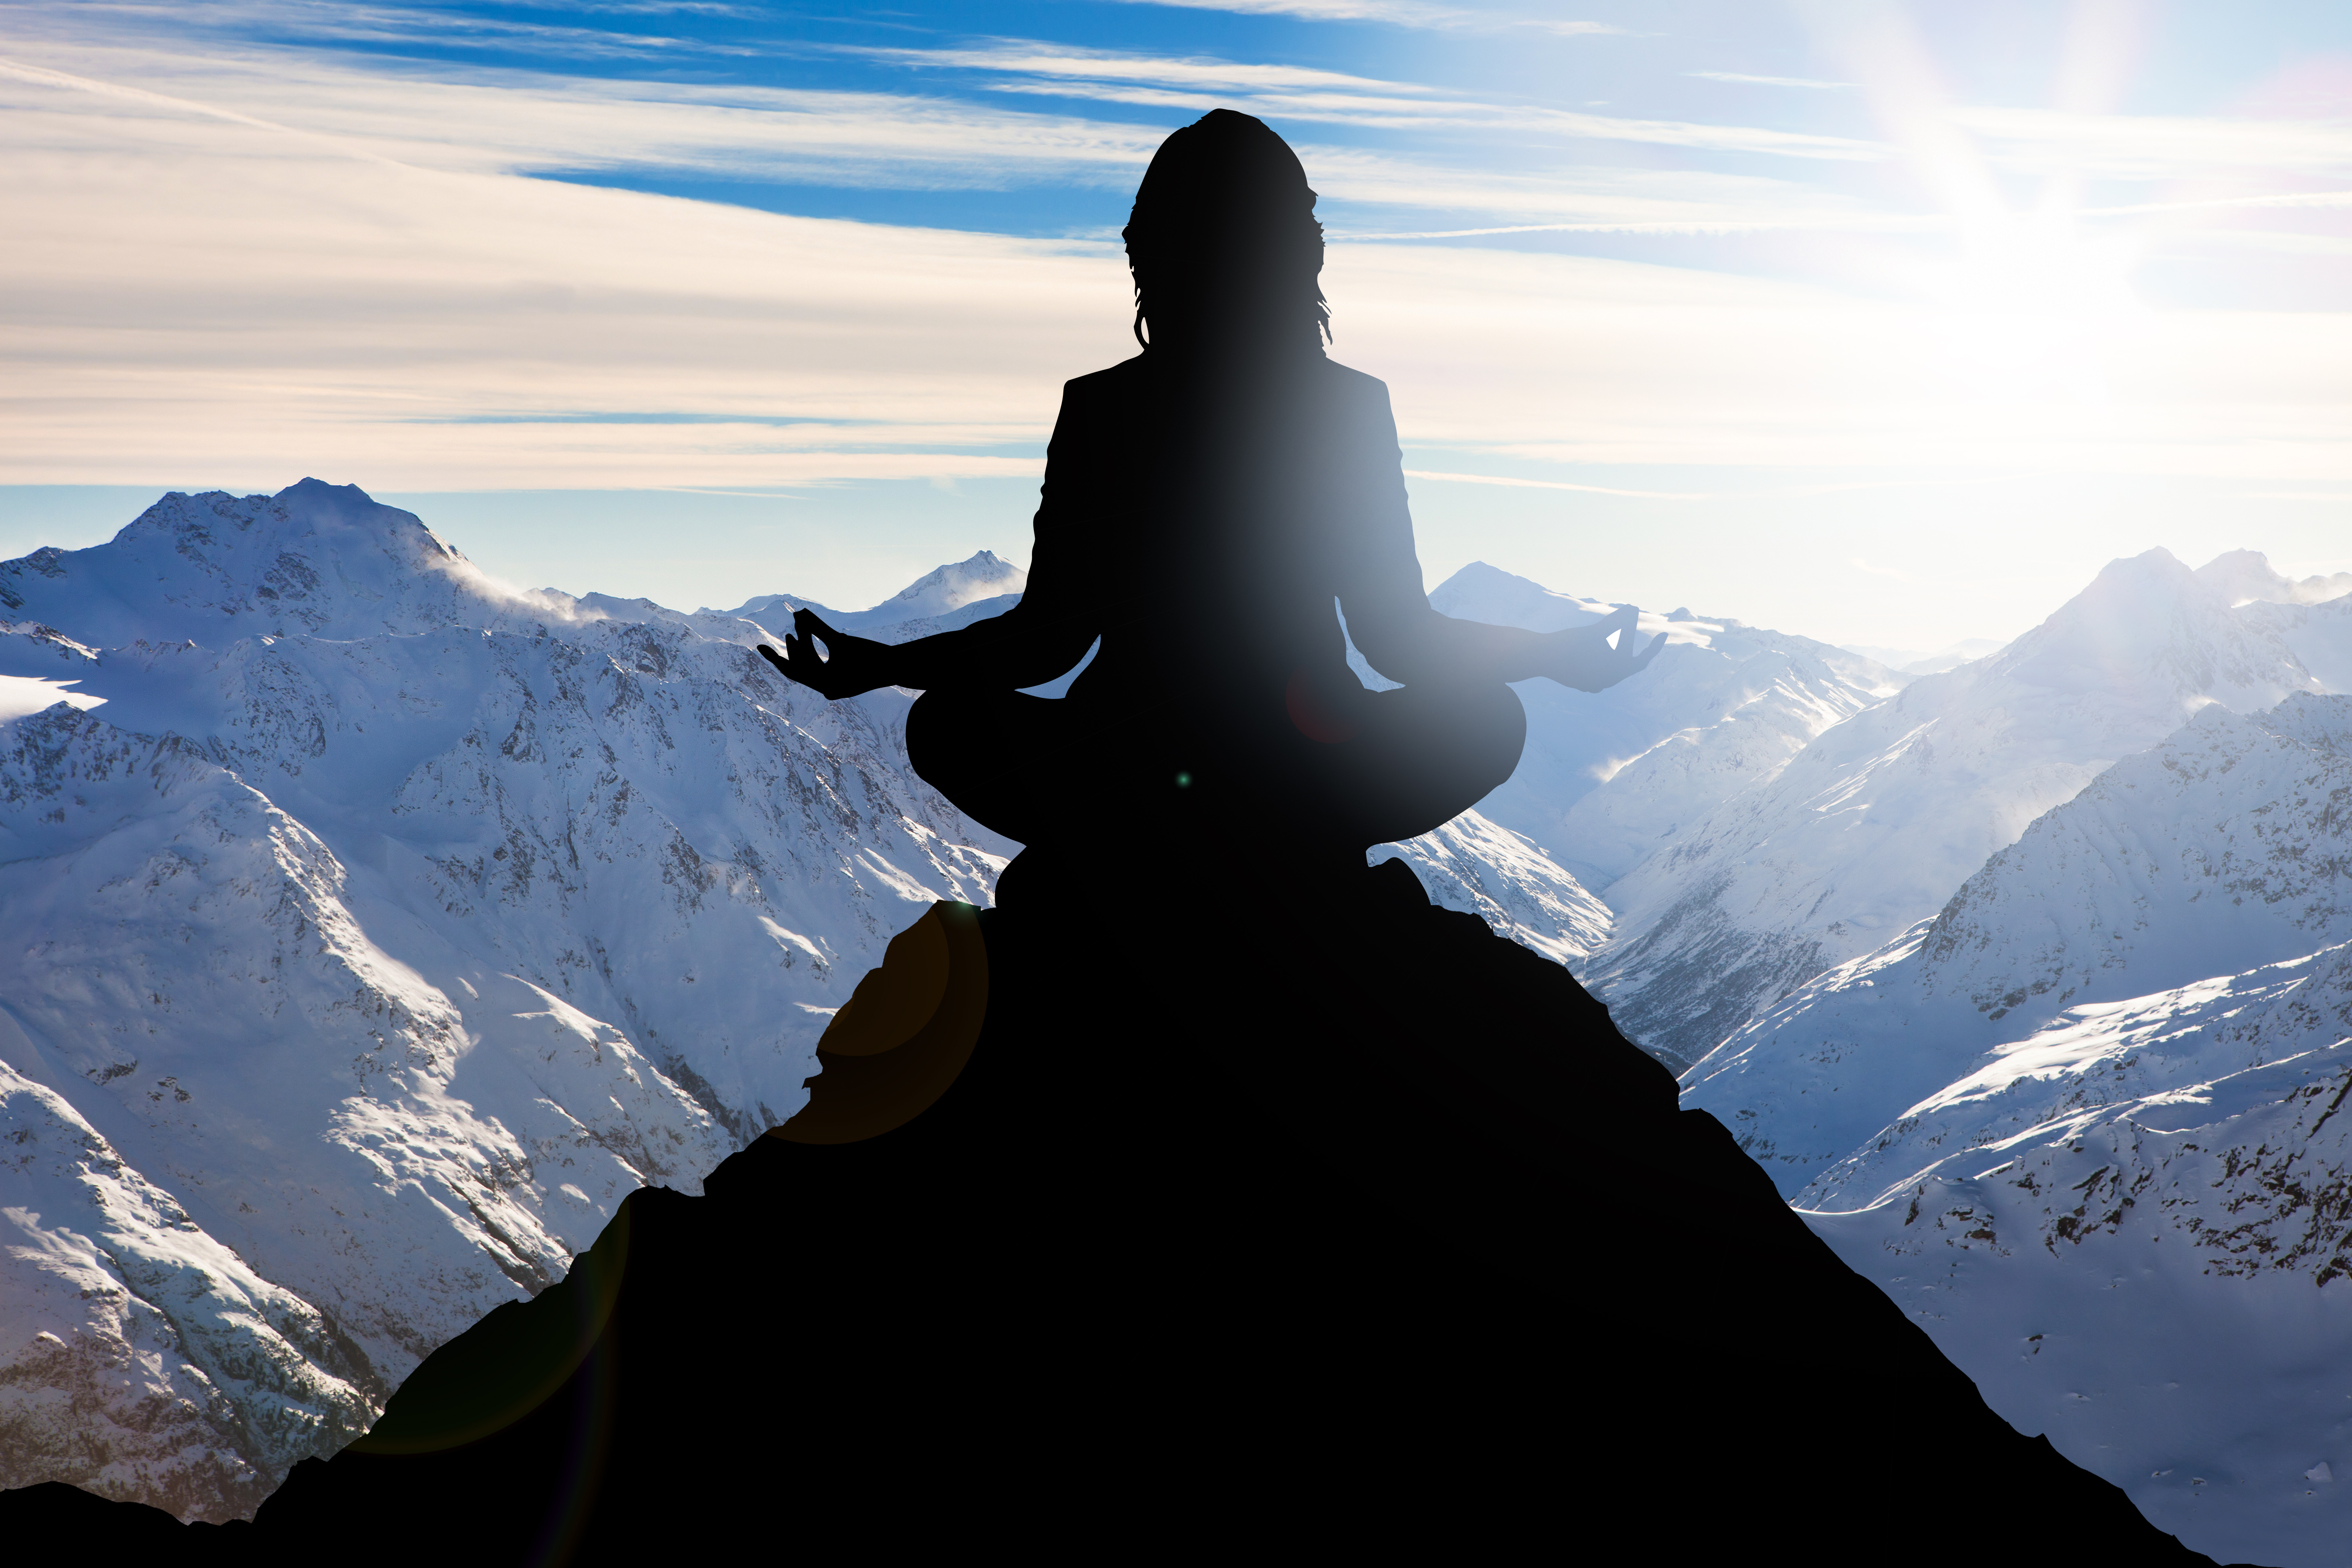 Silhouette Of A Woman Performing Yoga On Mountain Peak